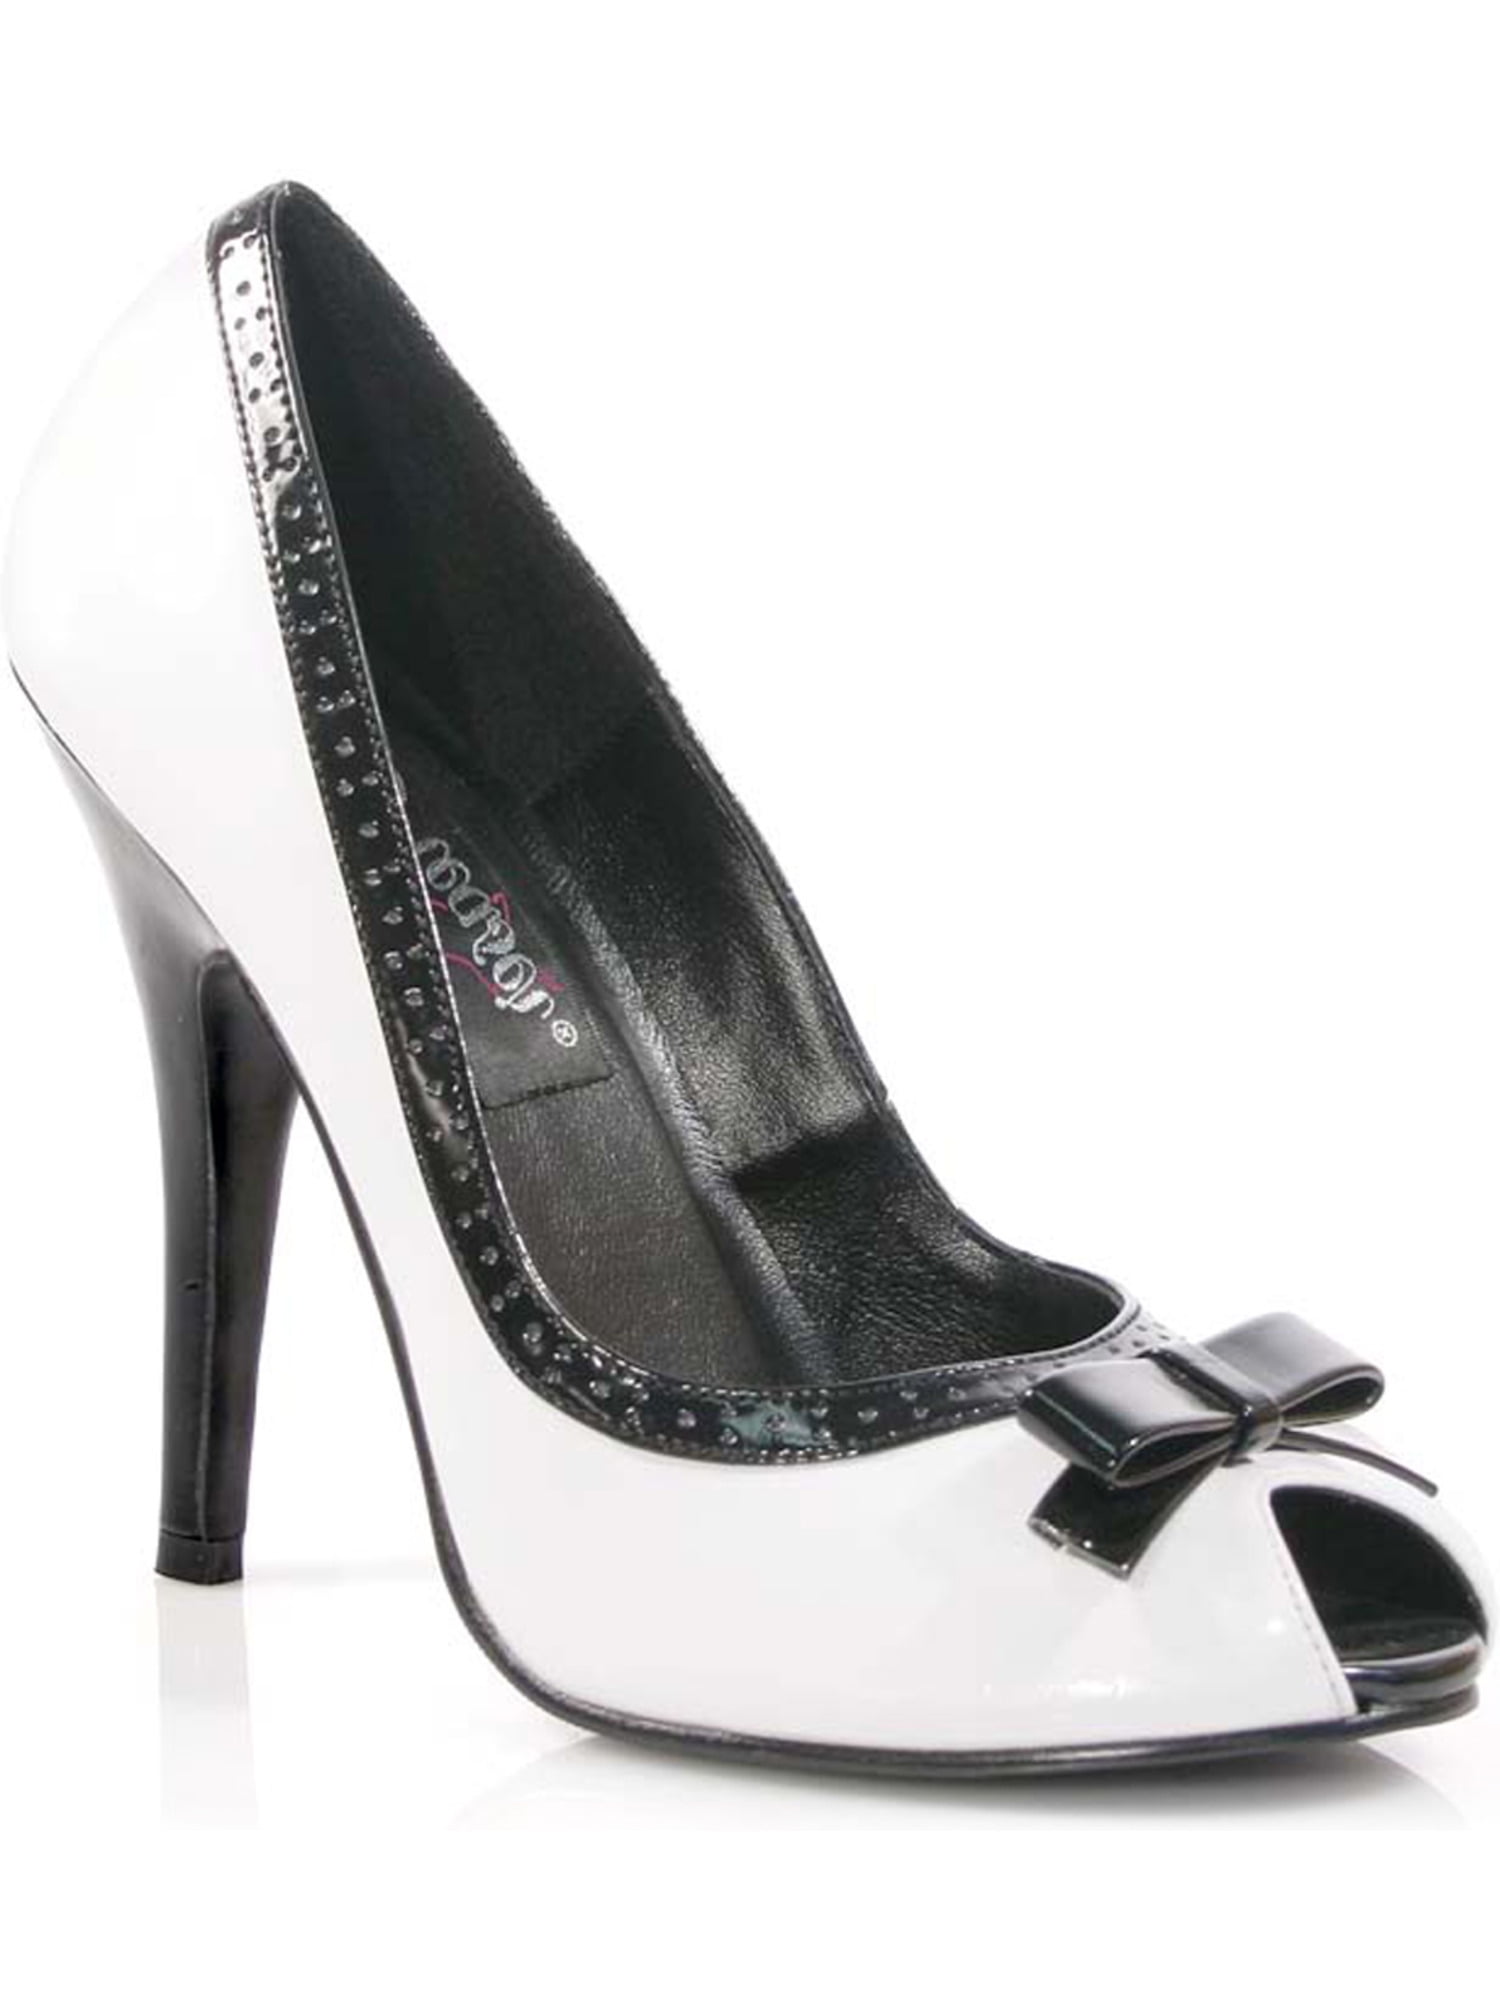 black and white shoes for womens dress